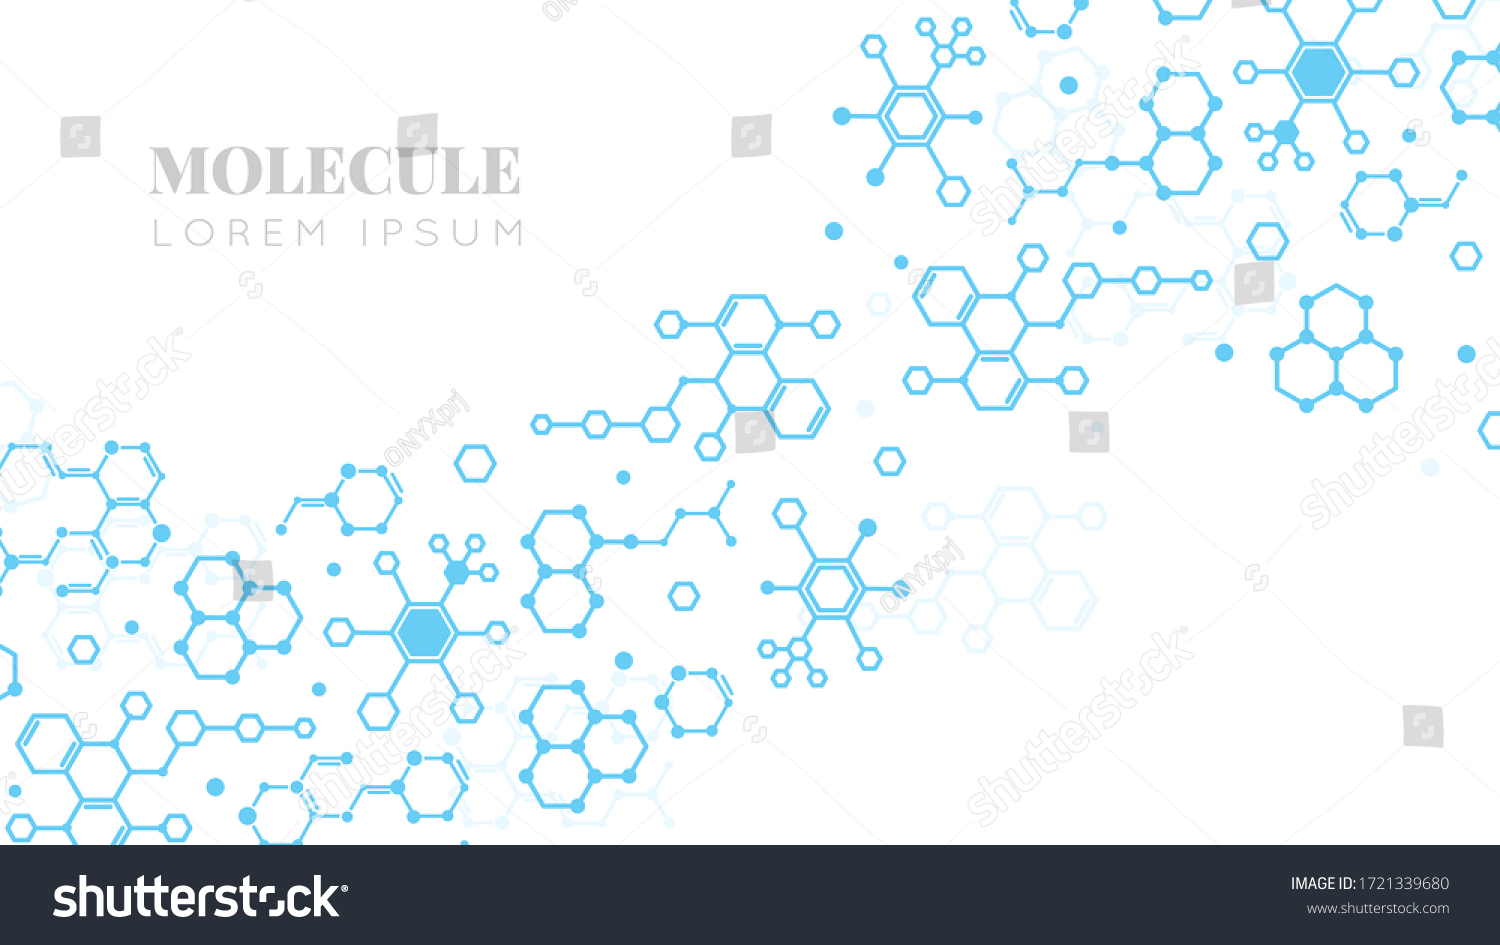 Molecular structure. Medicine researching, DNA or chemistry science. Biotechnology presentation template vector background #1721339680